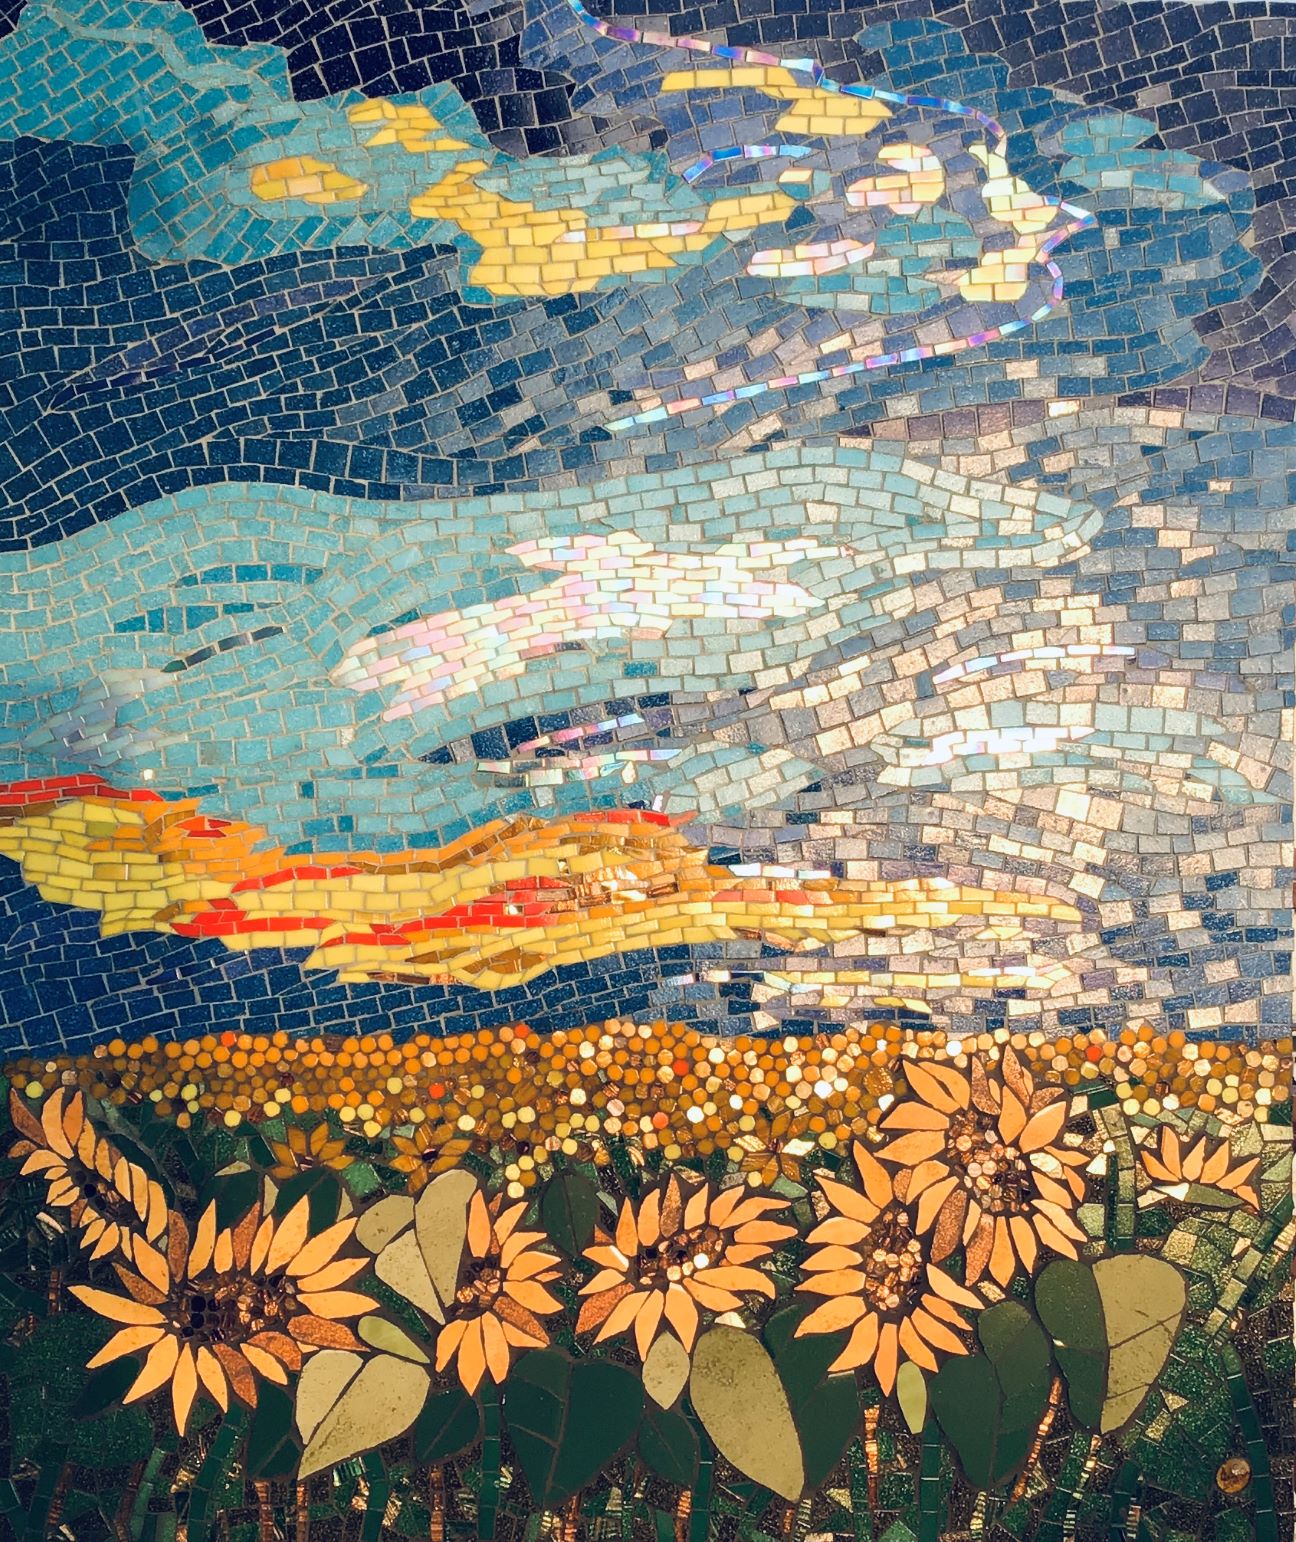 Kanika Singh, Filling in the Blues with Sunshine, Mosaic in glass and ceramic tiles 30x36 inches, April 2020